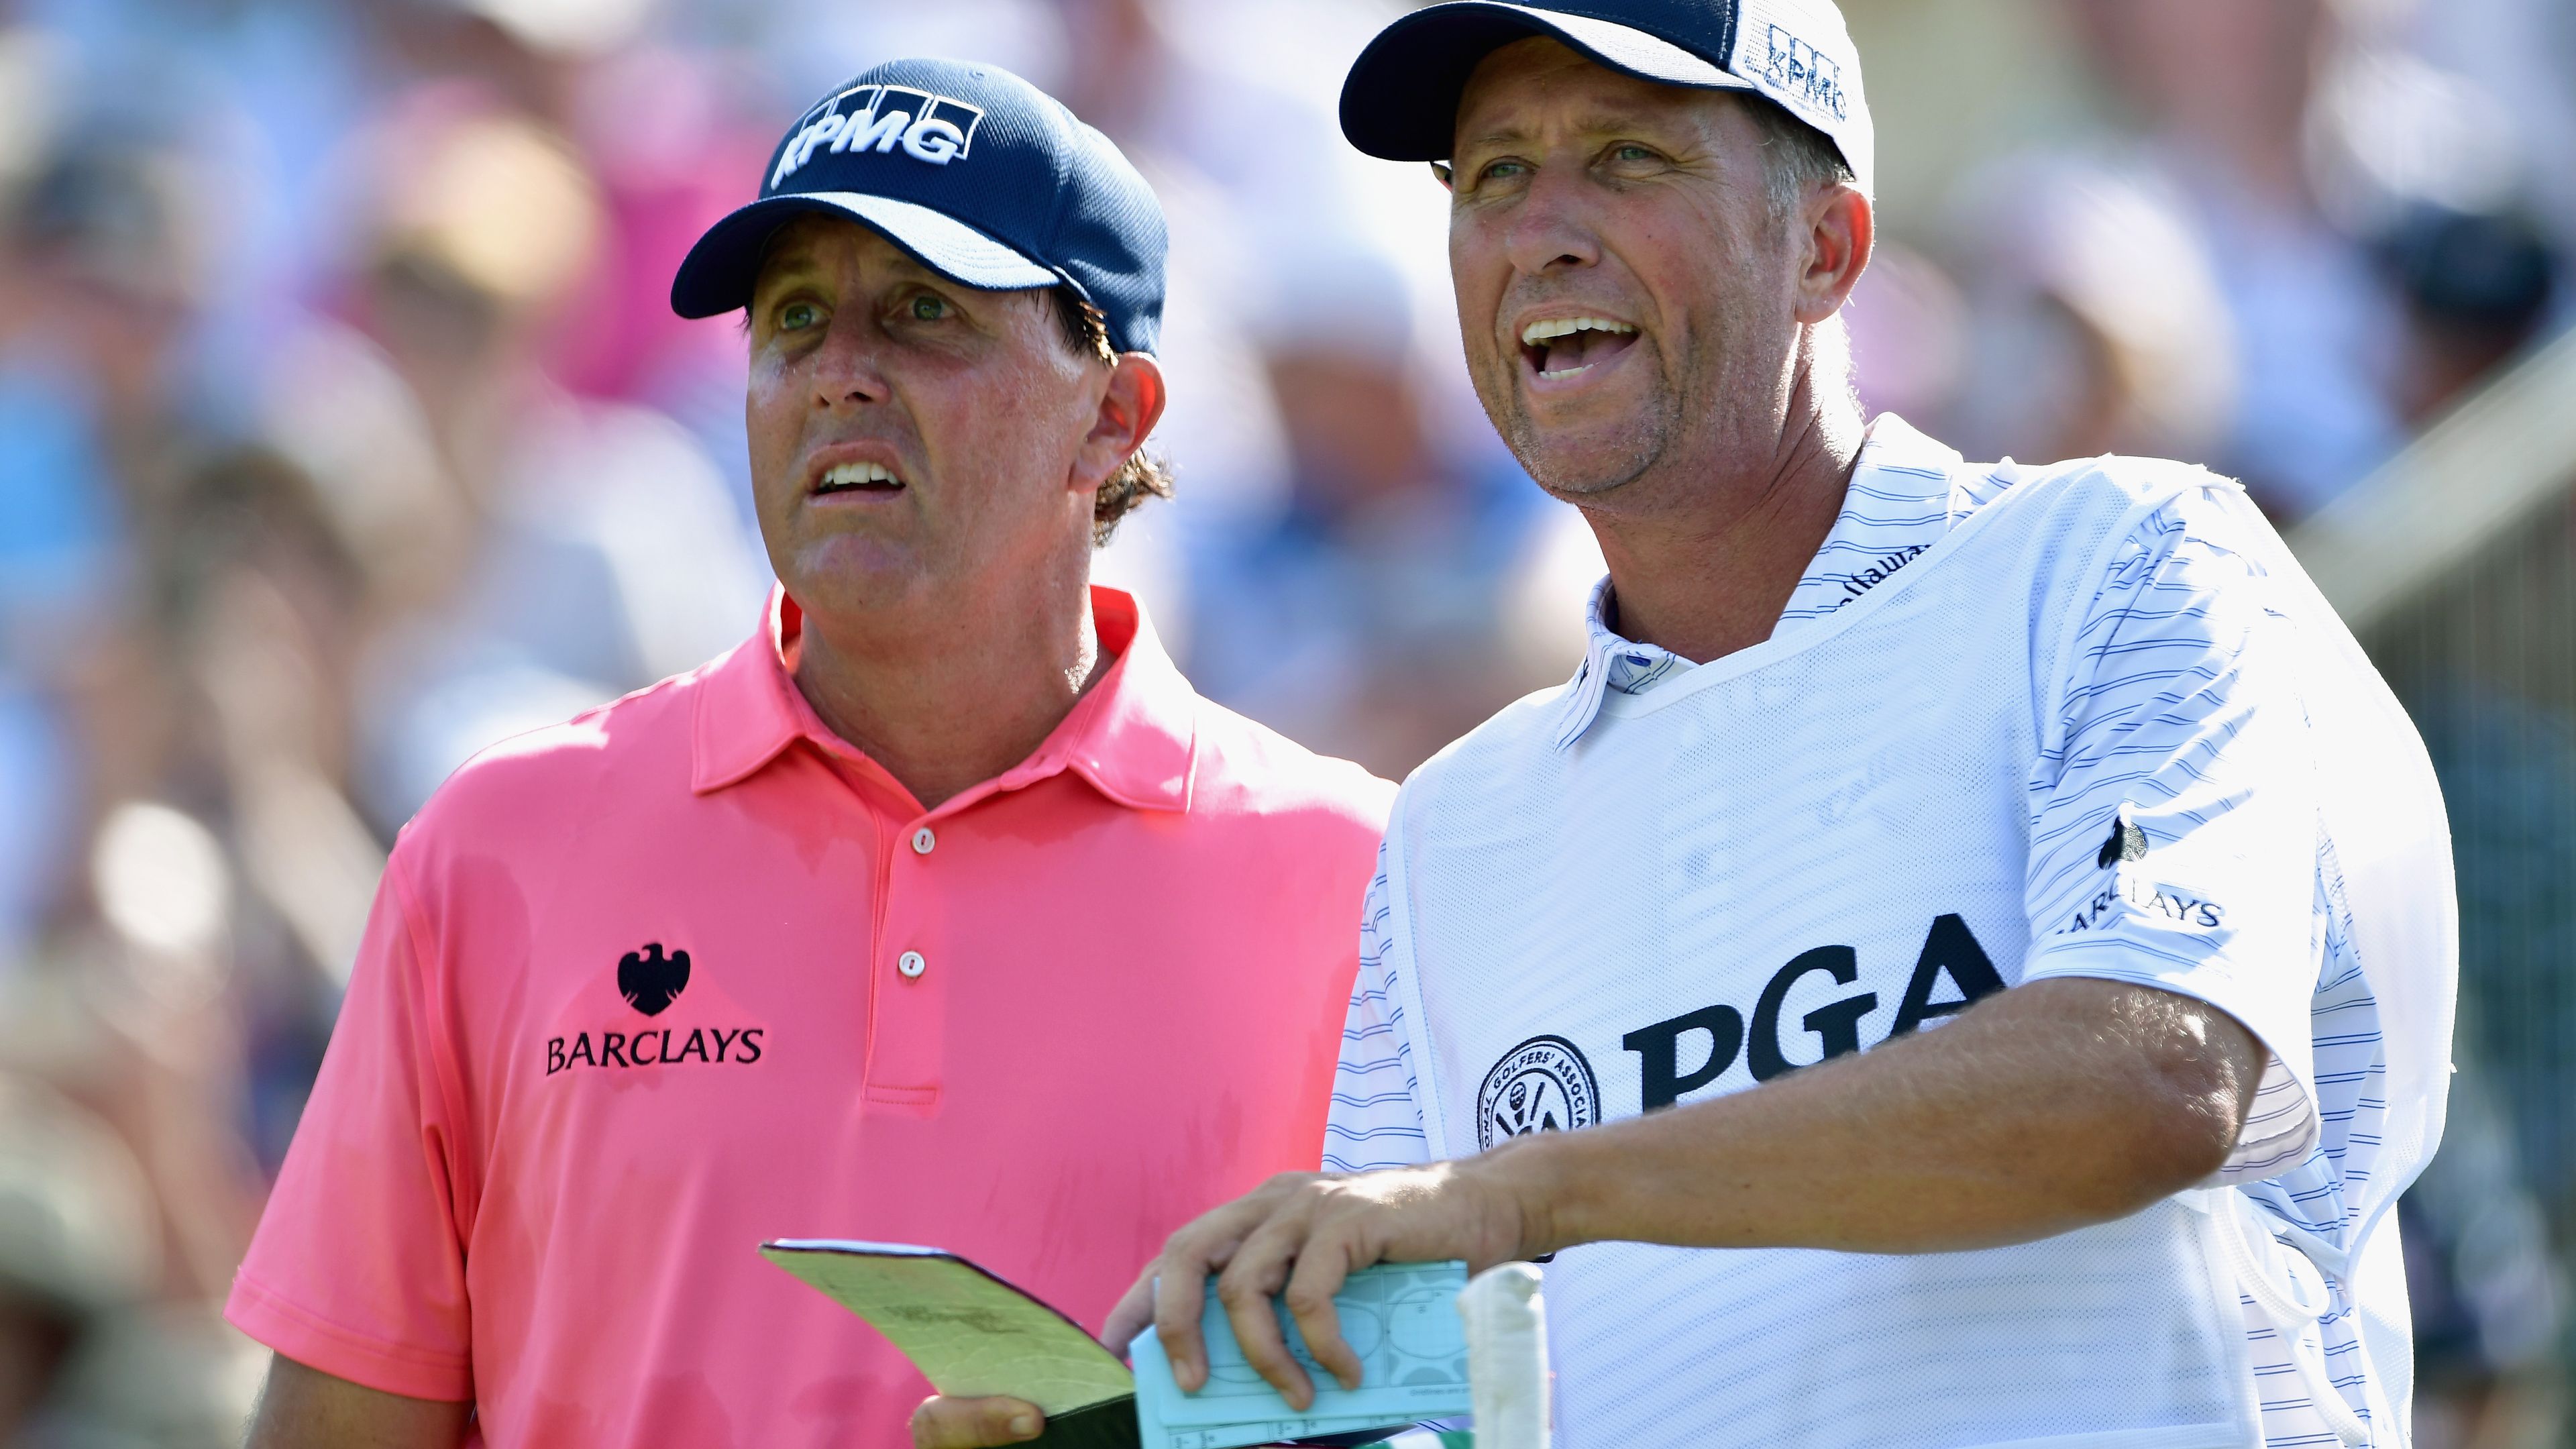 Phil Mickelson and caddie Jim Mackay during the first round of the 2016 PGA Championship at Baltusrol Golf Club.